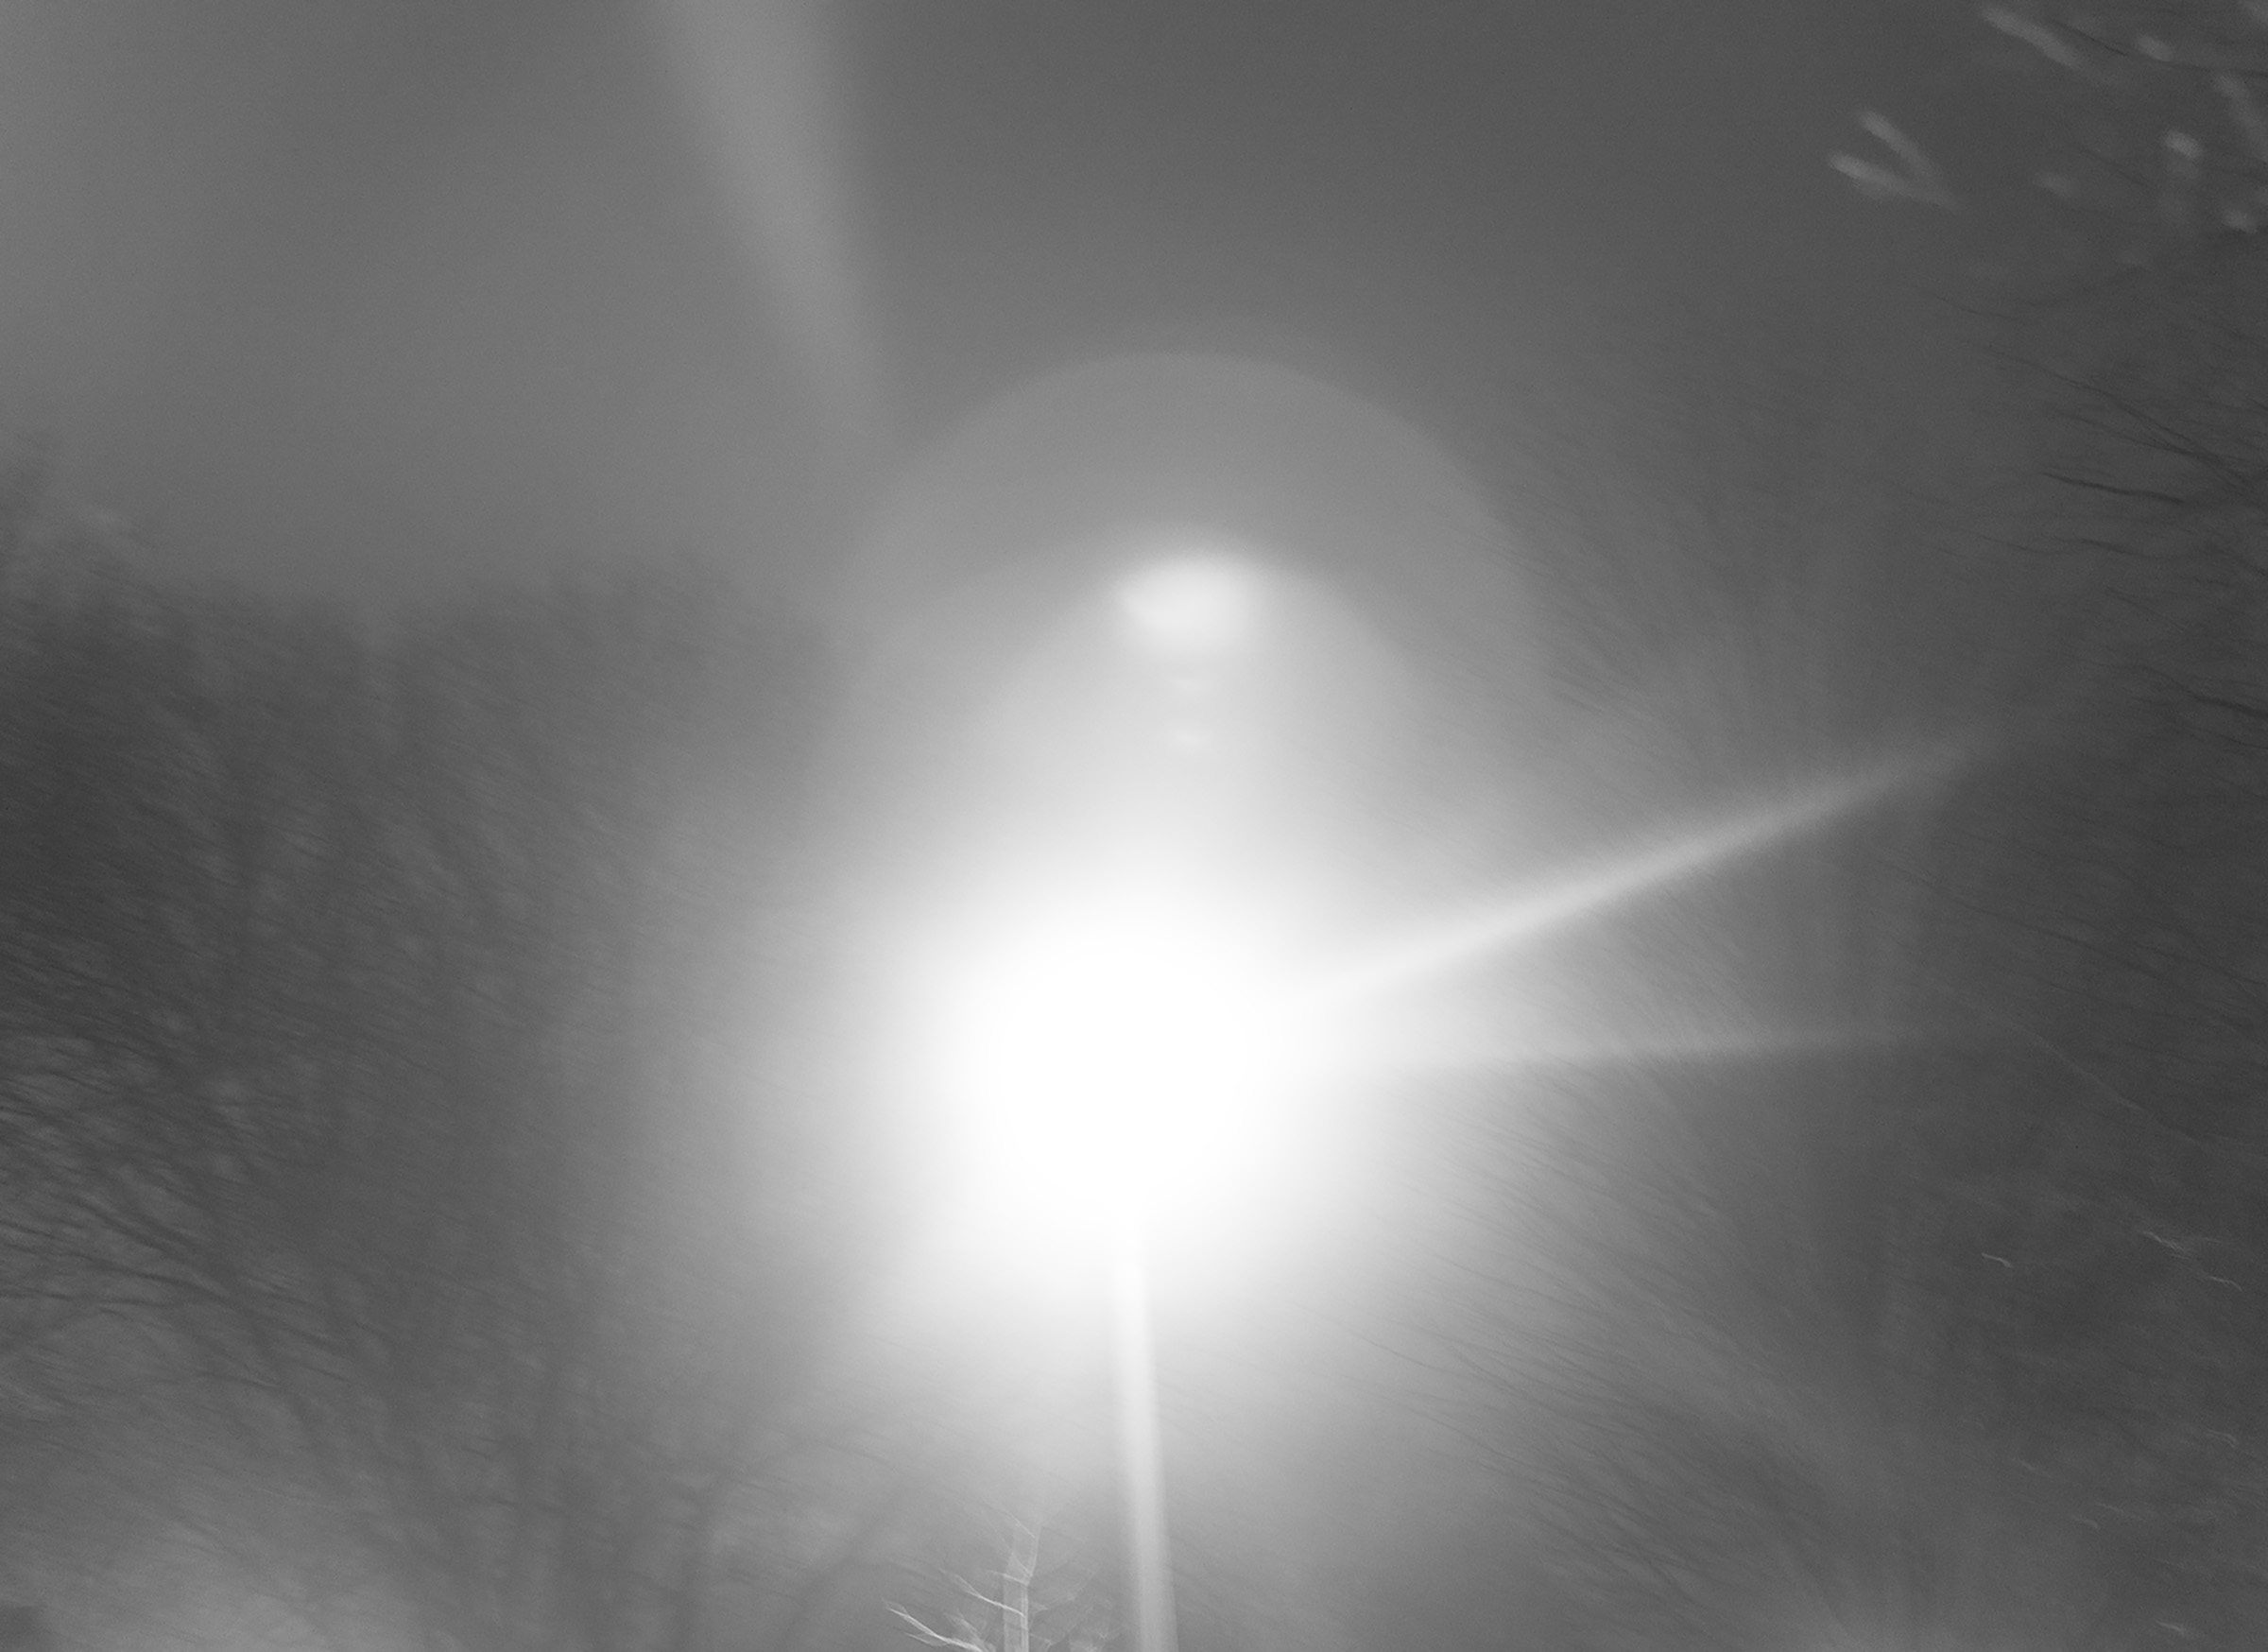 A black and white photo of a street lamp in front of some bare trees and a cloudy sky at night. The street lamp light is blown out creating a large oval of light in the middle of the photo.